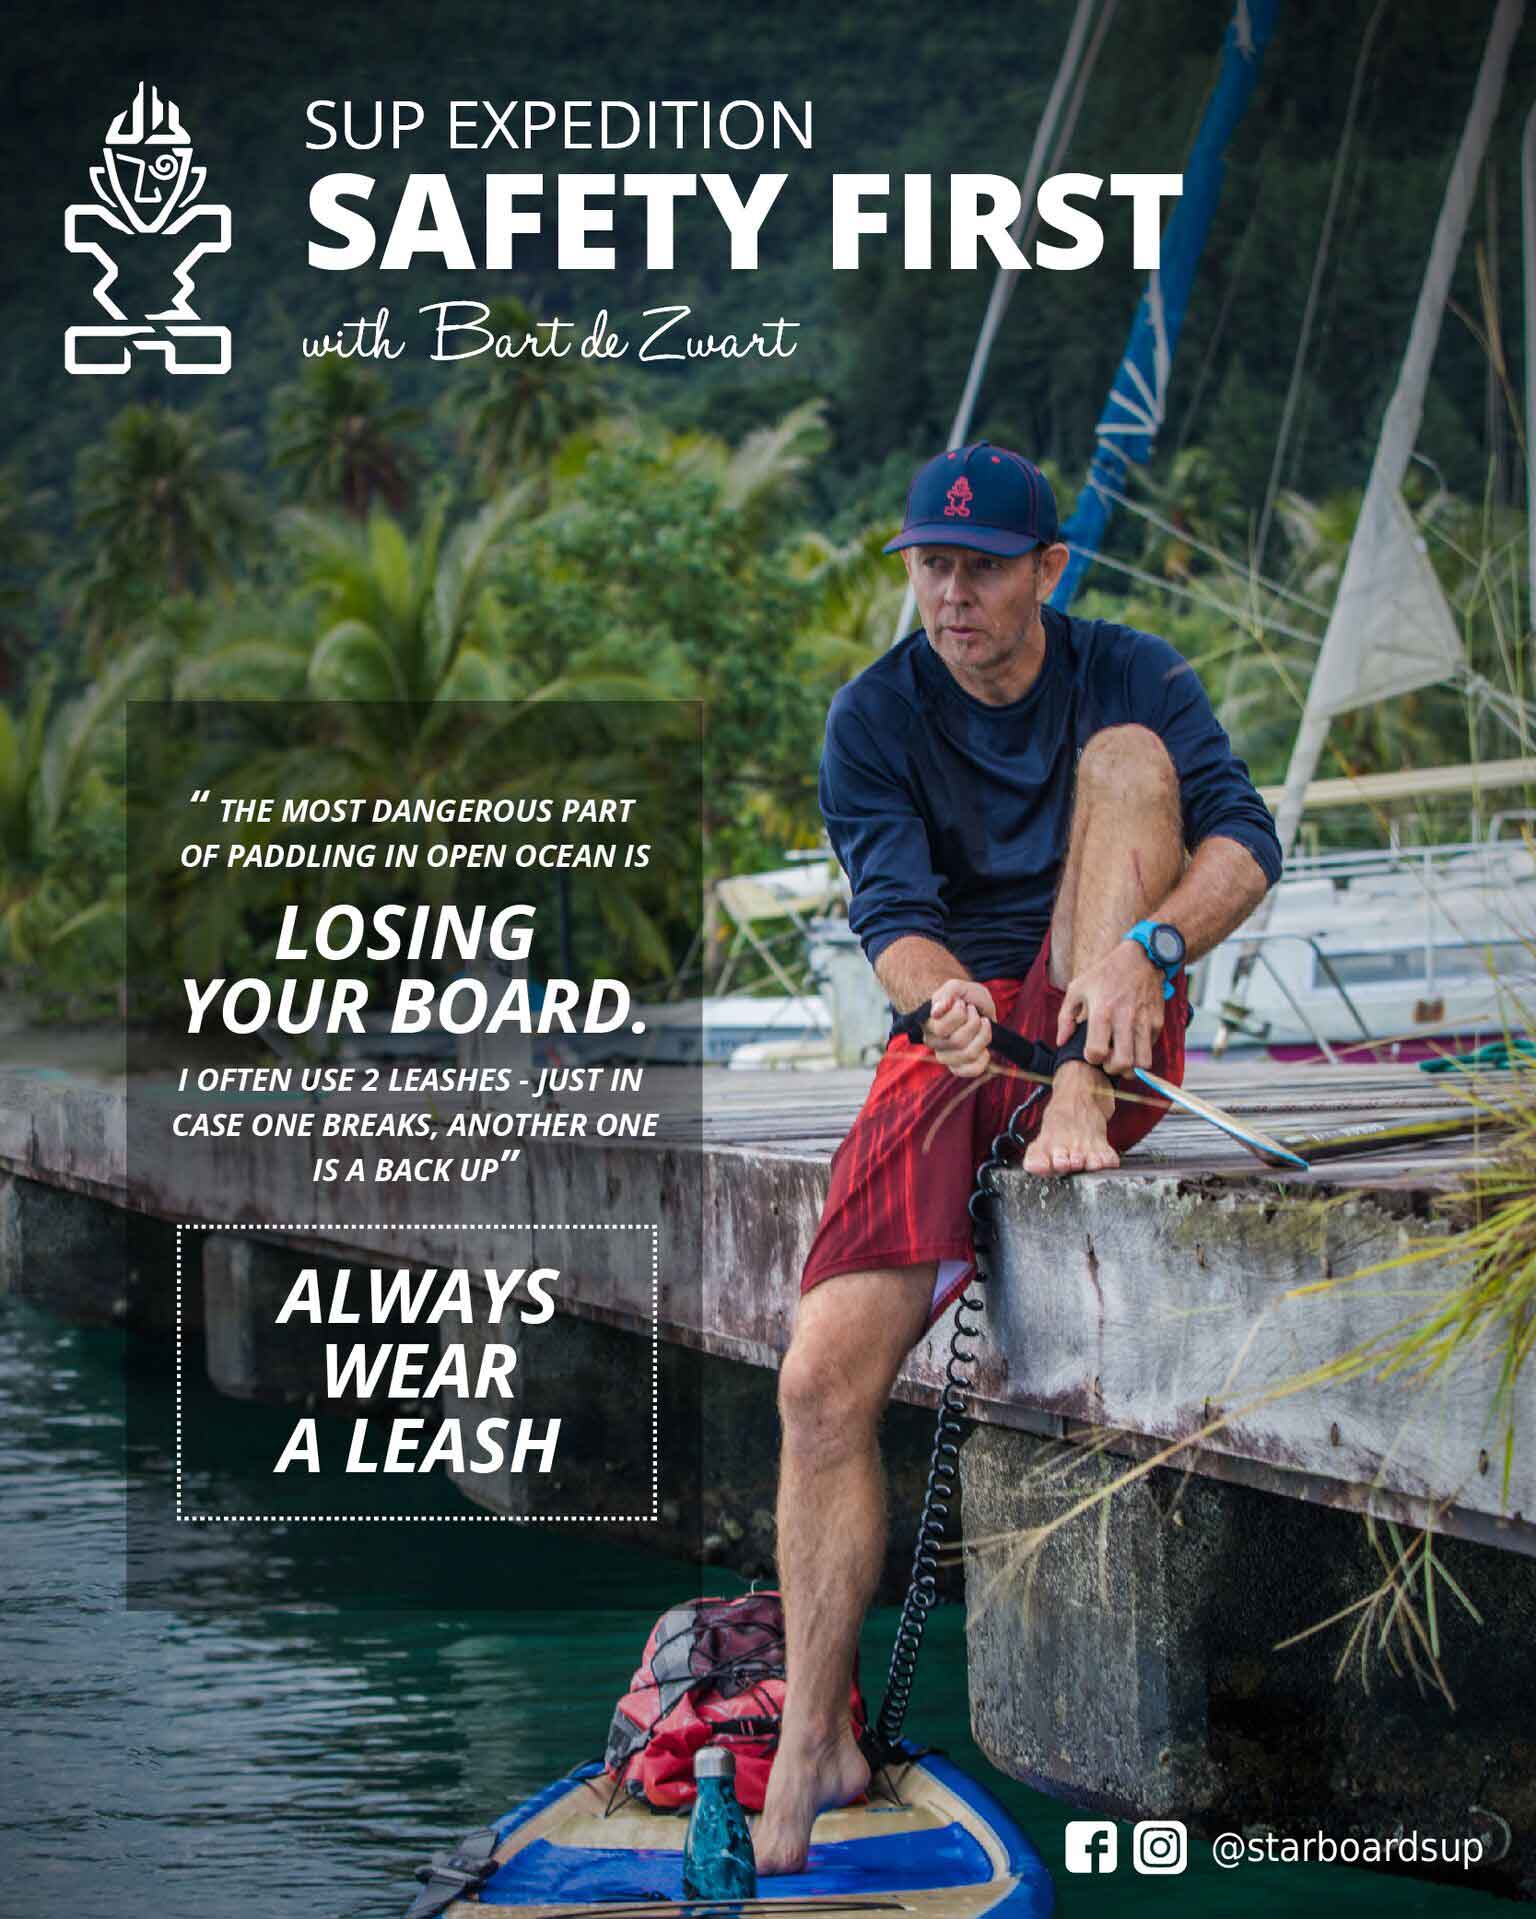 SUP Expedition Tip - Always Wear A LeashSup-expedition-Safety-first-with-Bart